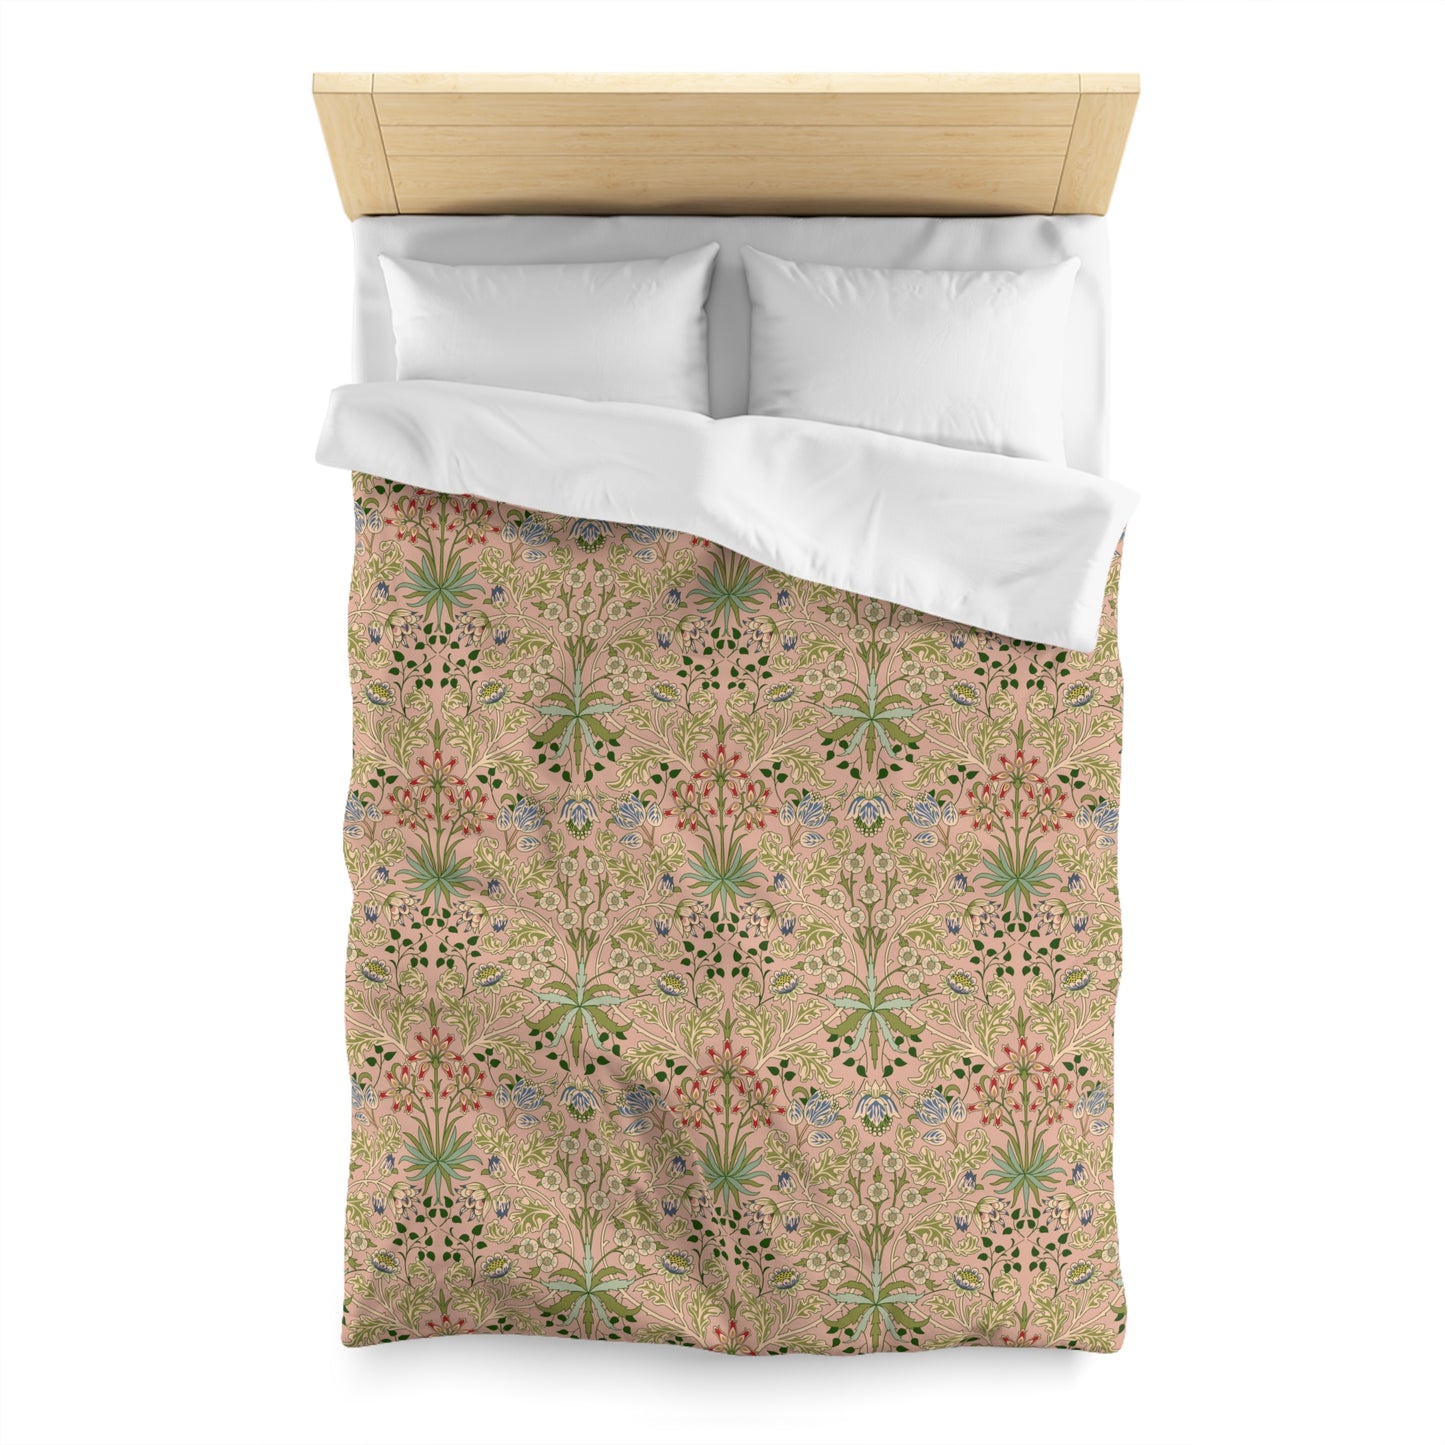 william-morris-co-duvet-cover-hyacinth-collection-blossom-4